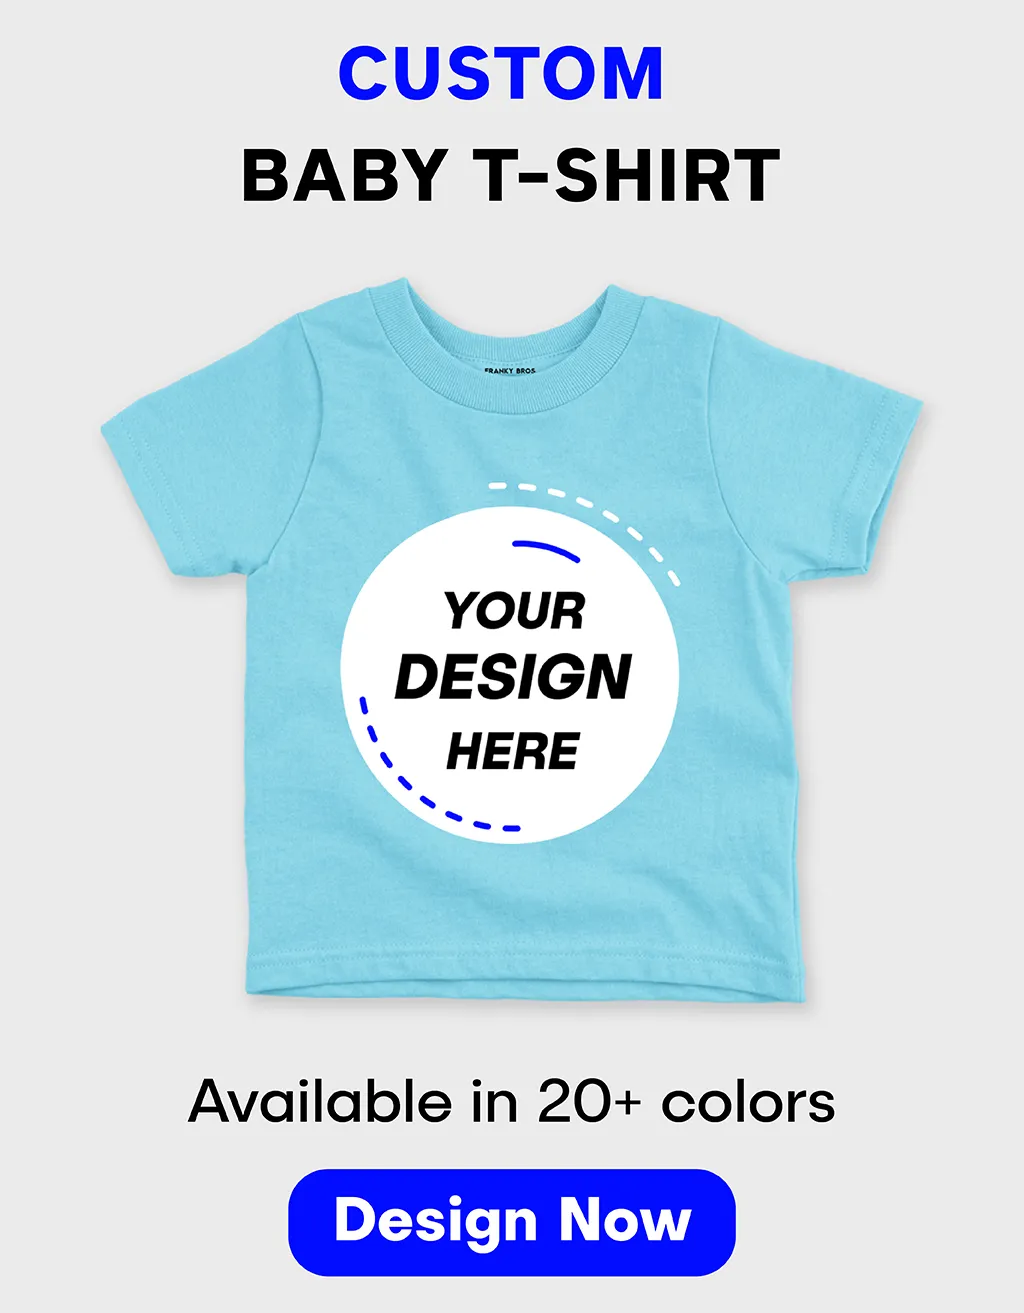 customized baby t shirt for baby boy and girl newborn t shirt photo printing near me new born baby clothes for photoshoot online baby dress in india